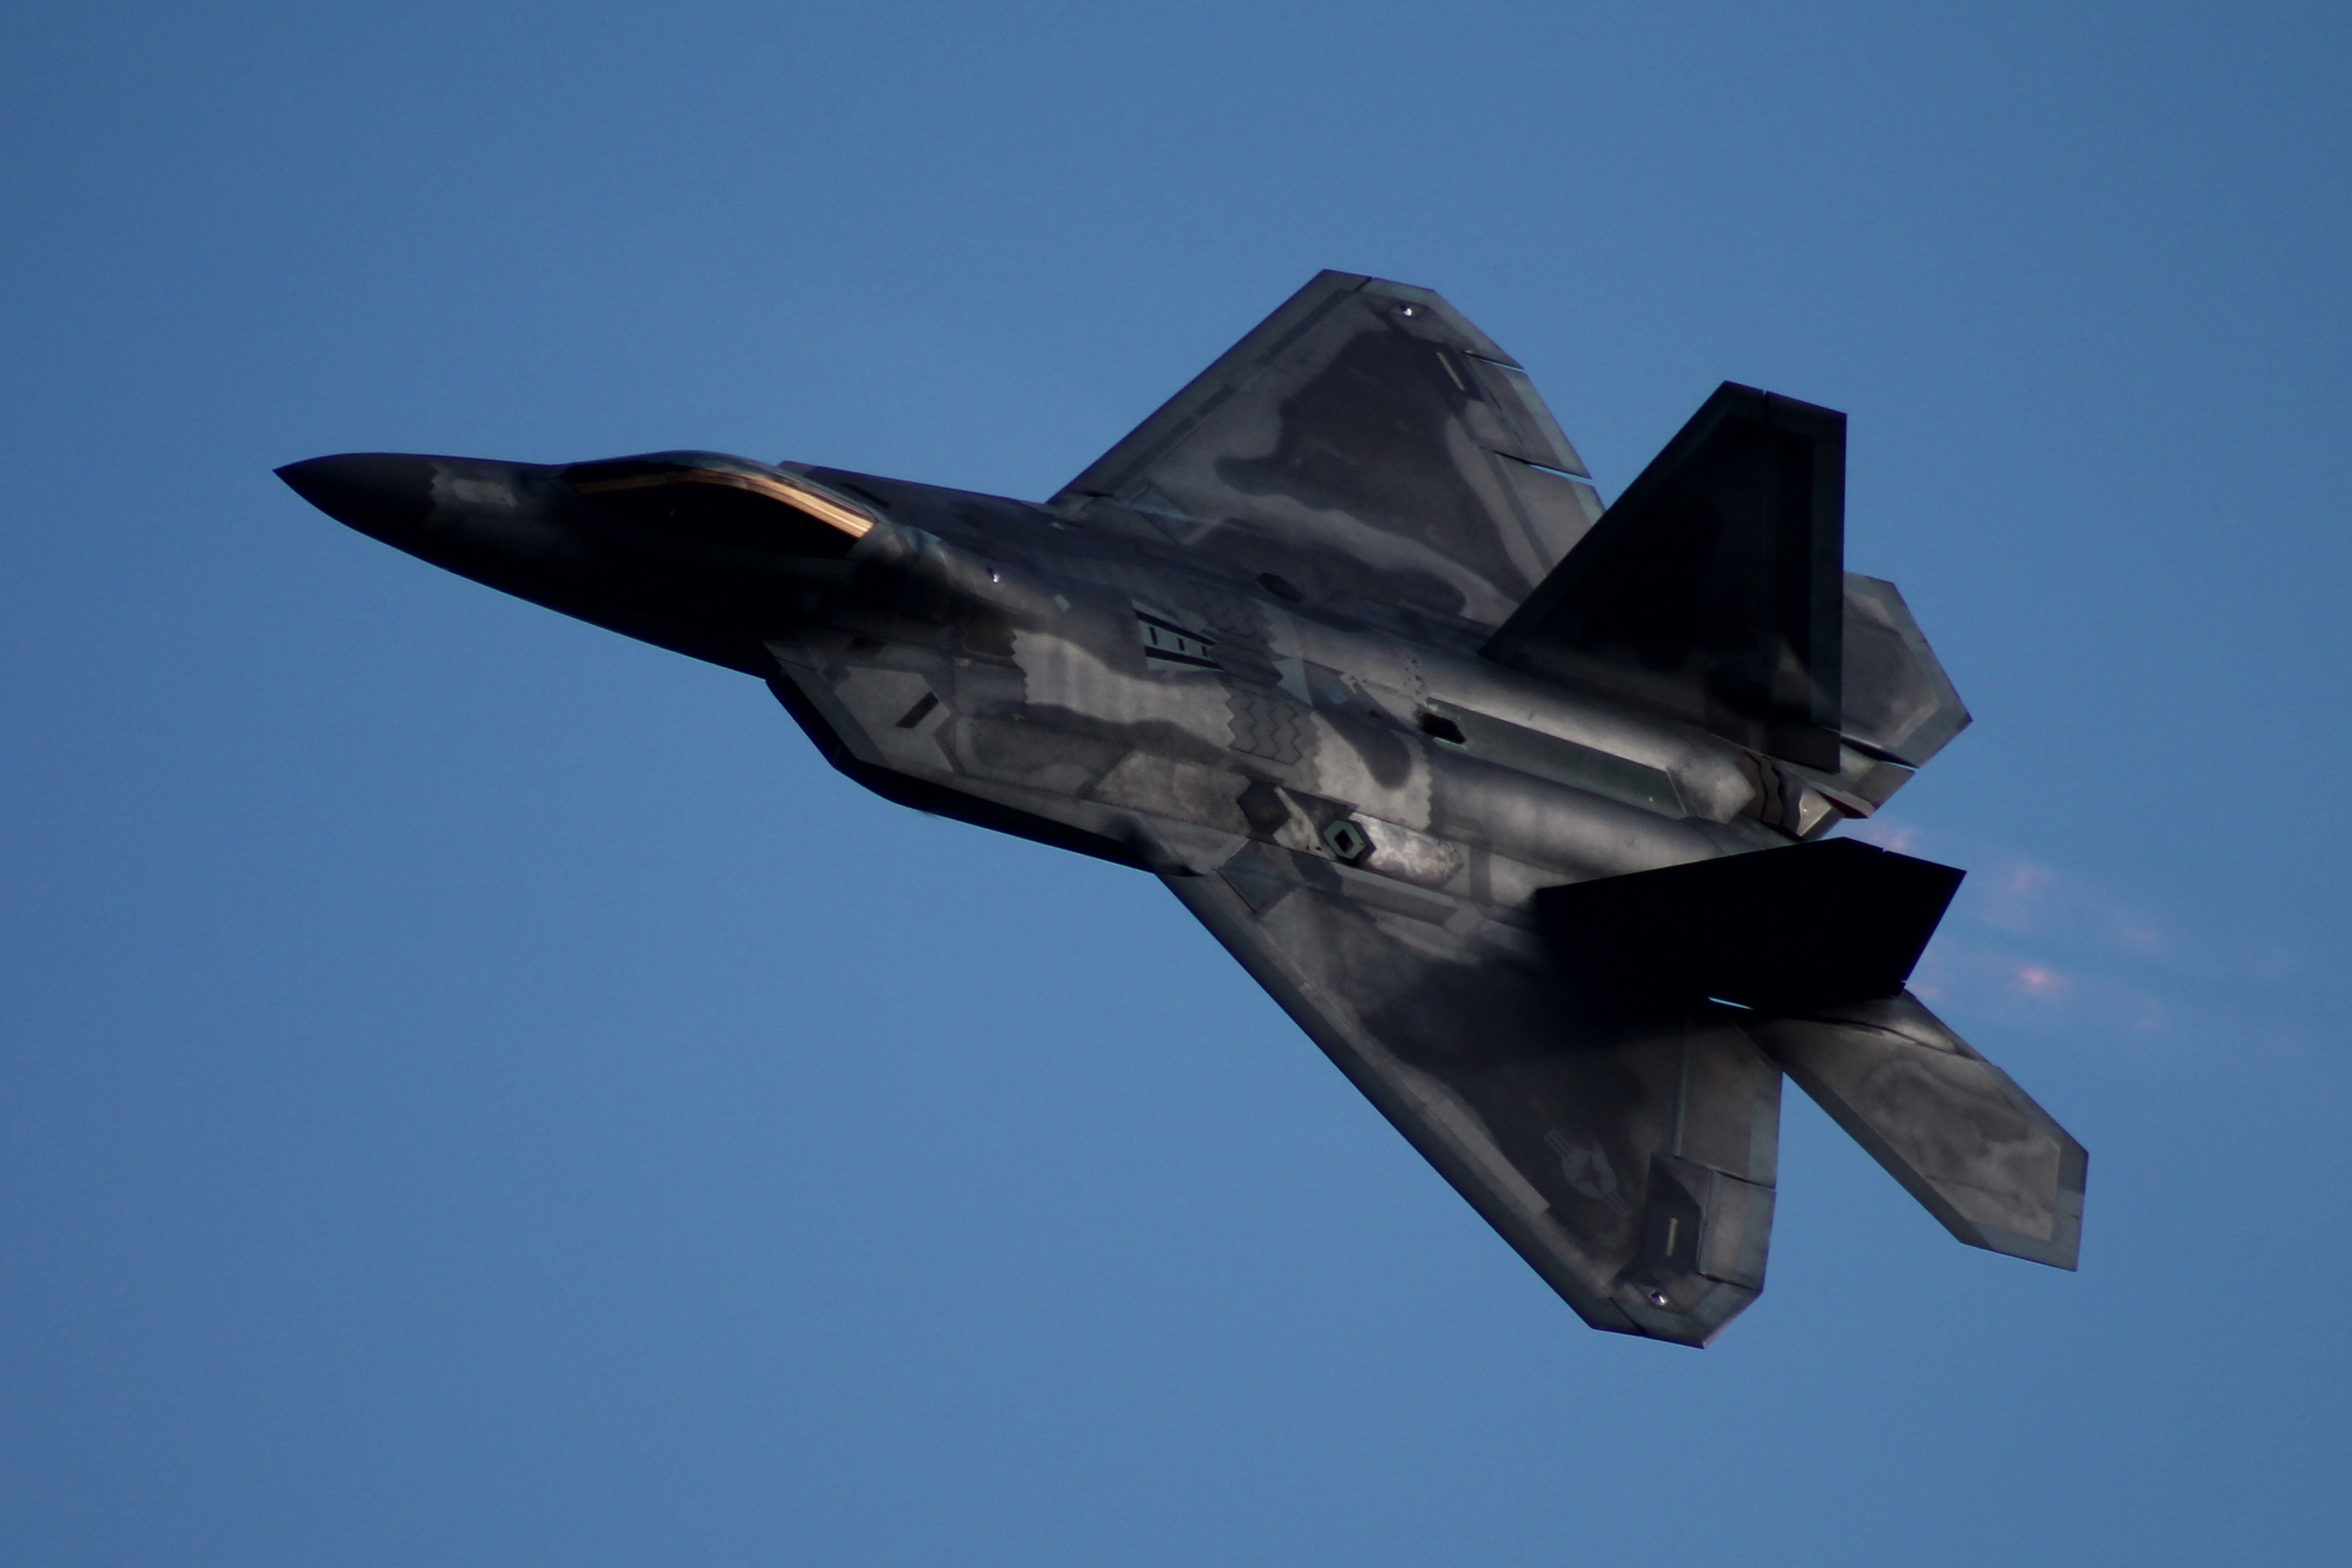 F-22 Raptor from the USAF's Air Combat Command